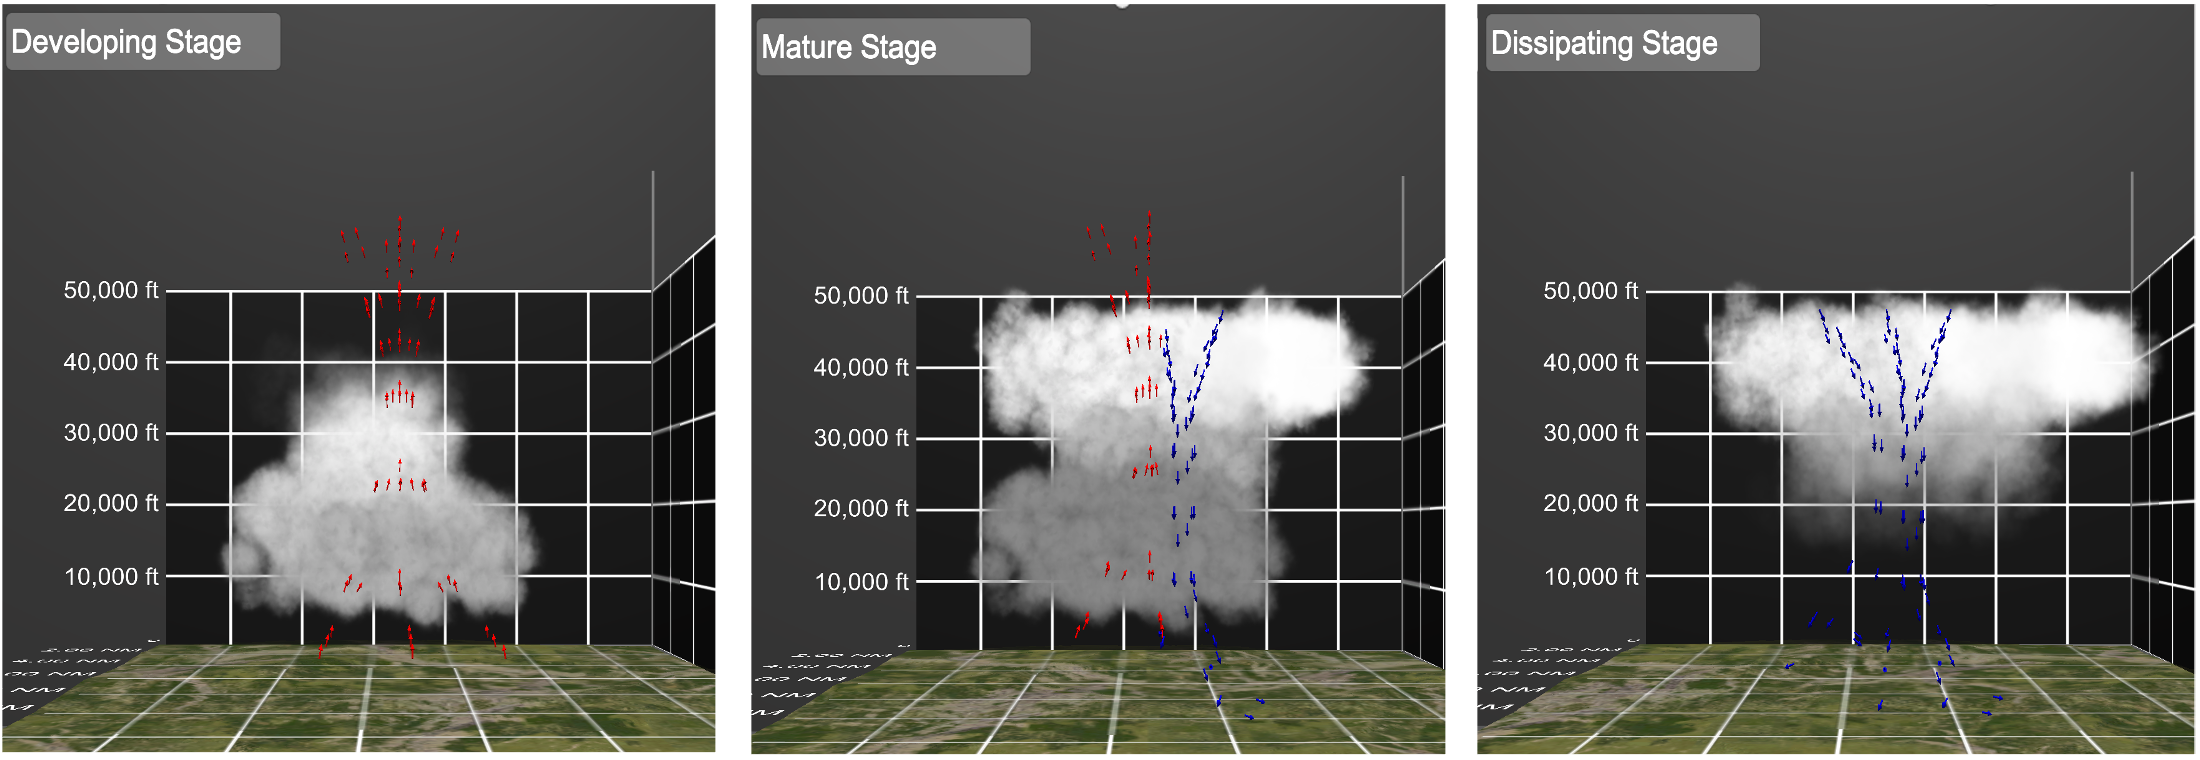 thunderstorm cell lifecycle visualization